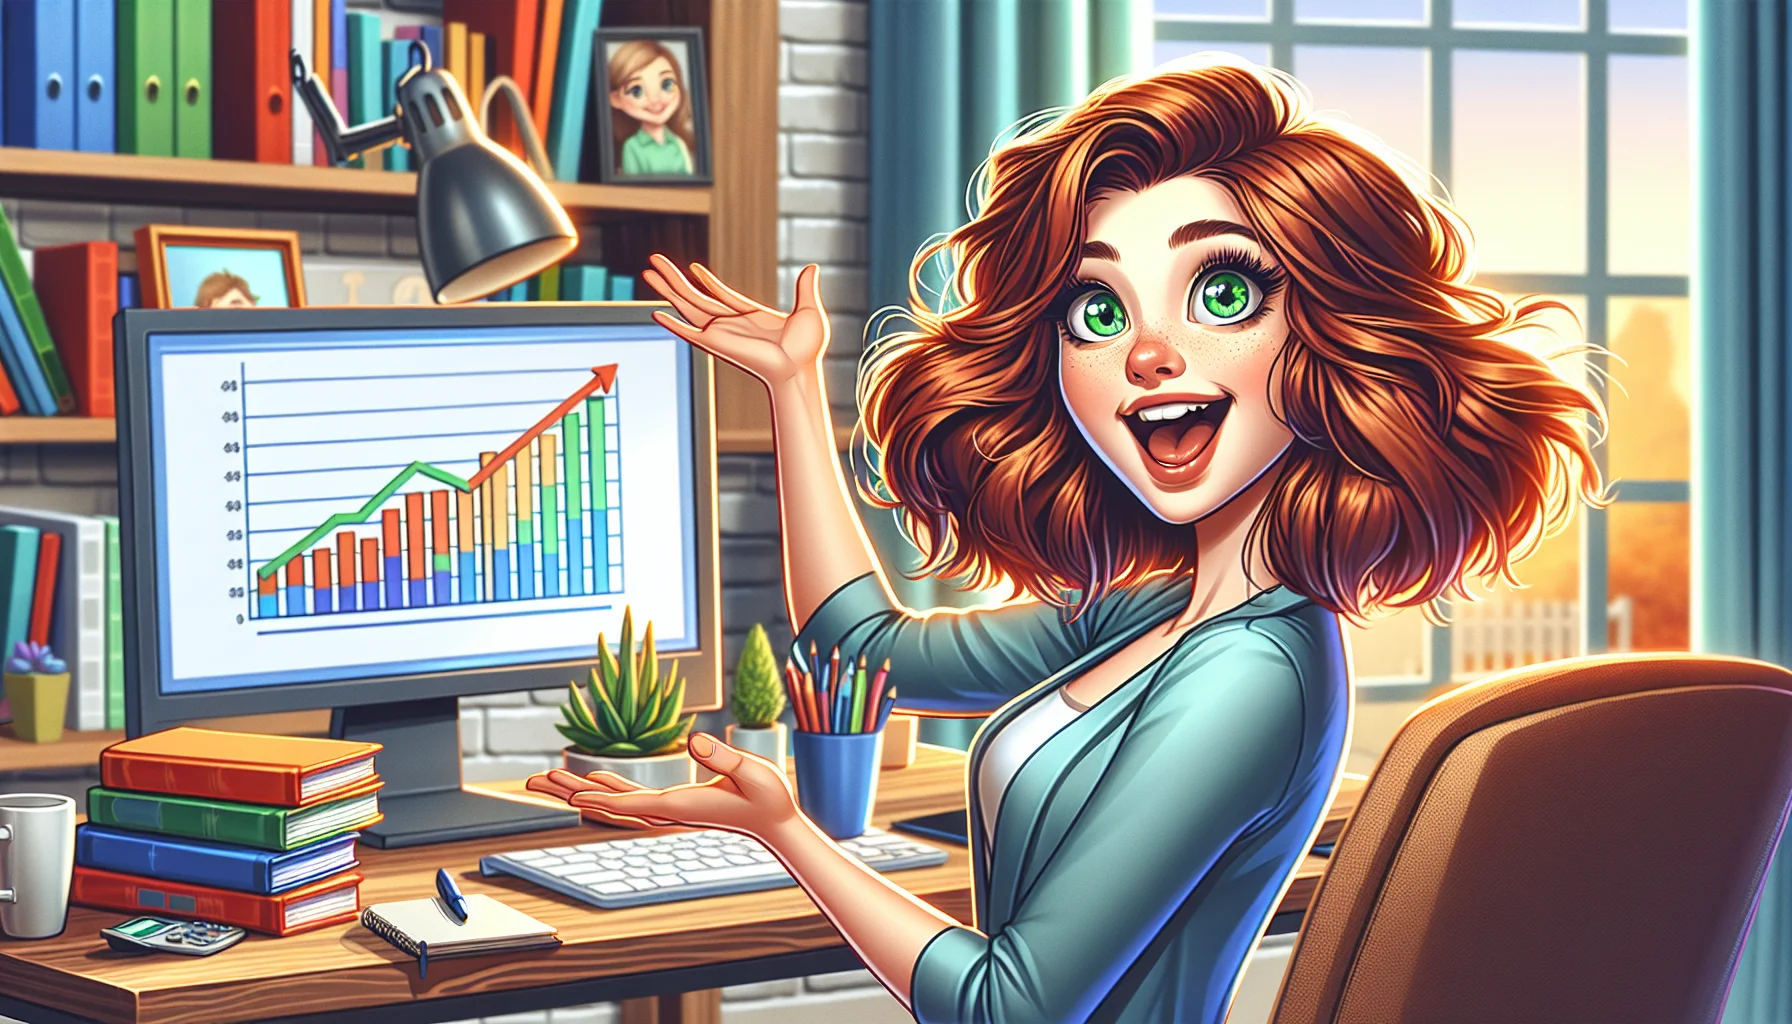 Create an amusing and realistic image of a typical affiliate marketer who we'll call Chelsea. Depict her with medium-length, wavy auburn hair and green eyes. She is energetically gesturing towards her computer screen, which displays a bar graph with a rising trajectory - signifying increasing profits - in vibrant colors. The setting is a thoughtfully furnished home office with a diverse assortment of books related to digital marketing and money-making stacked around. Her expression, captured midway between surprise and glee, reflects the enticing potential of making money online.